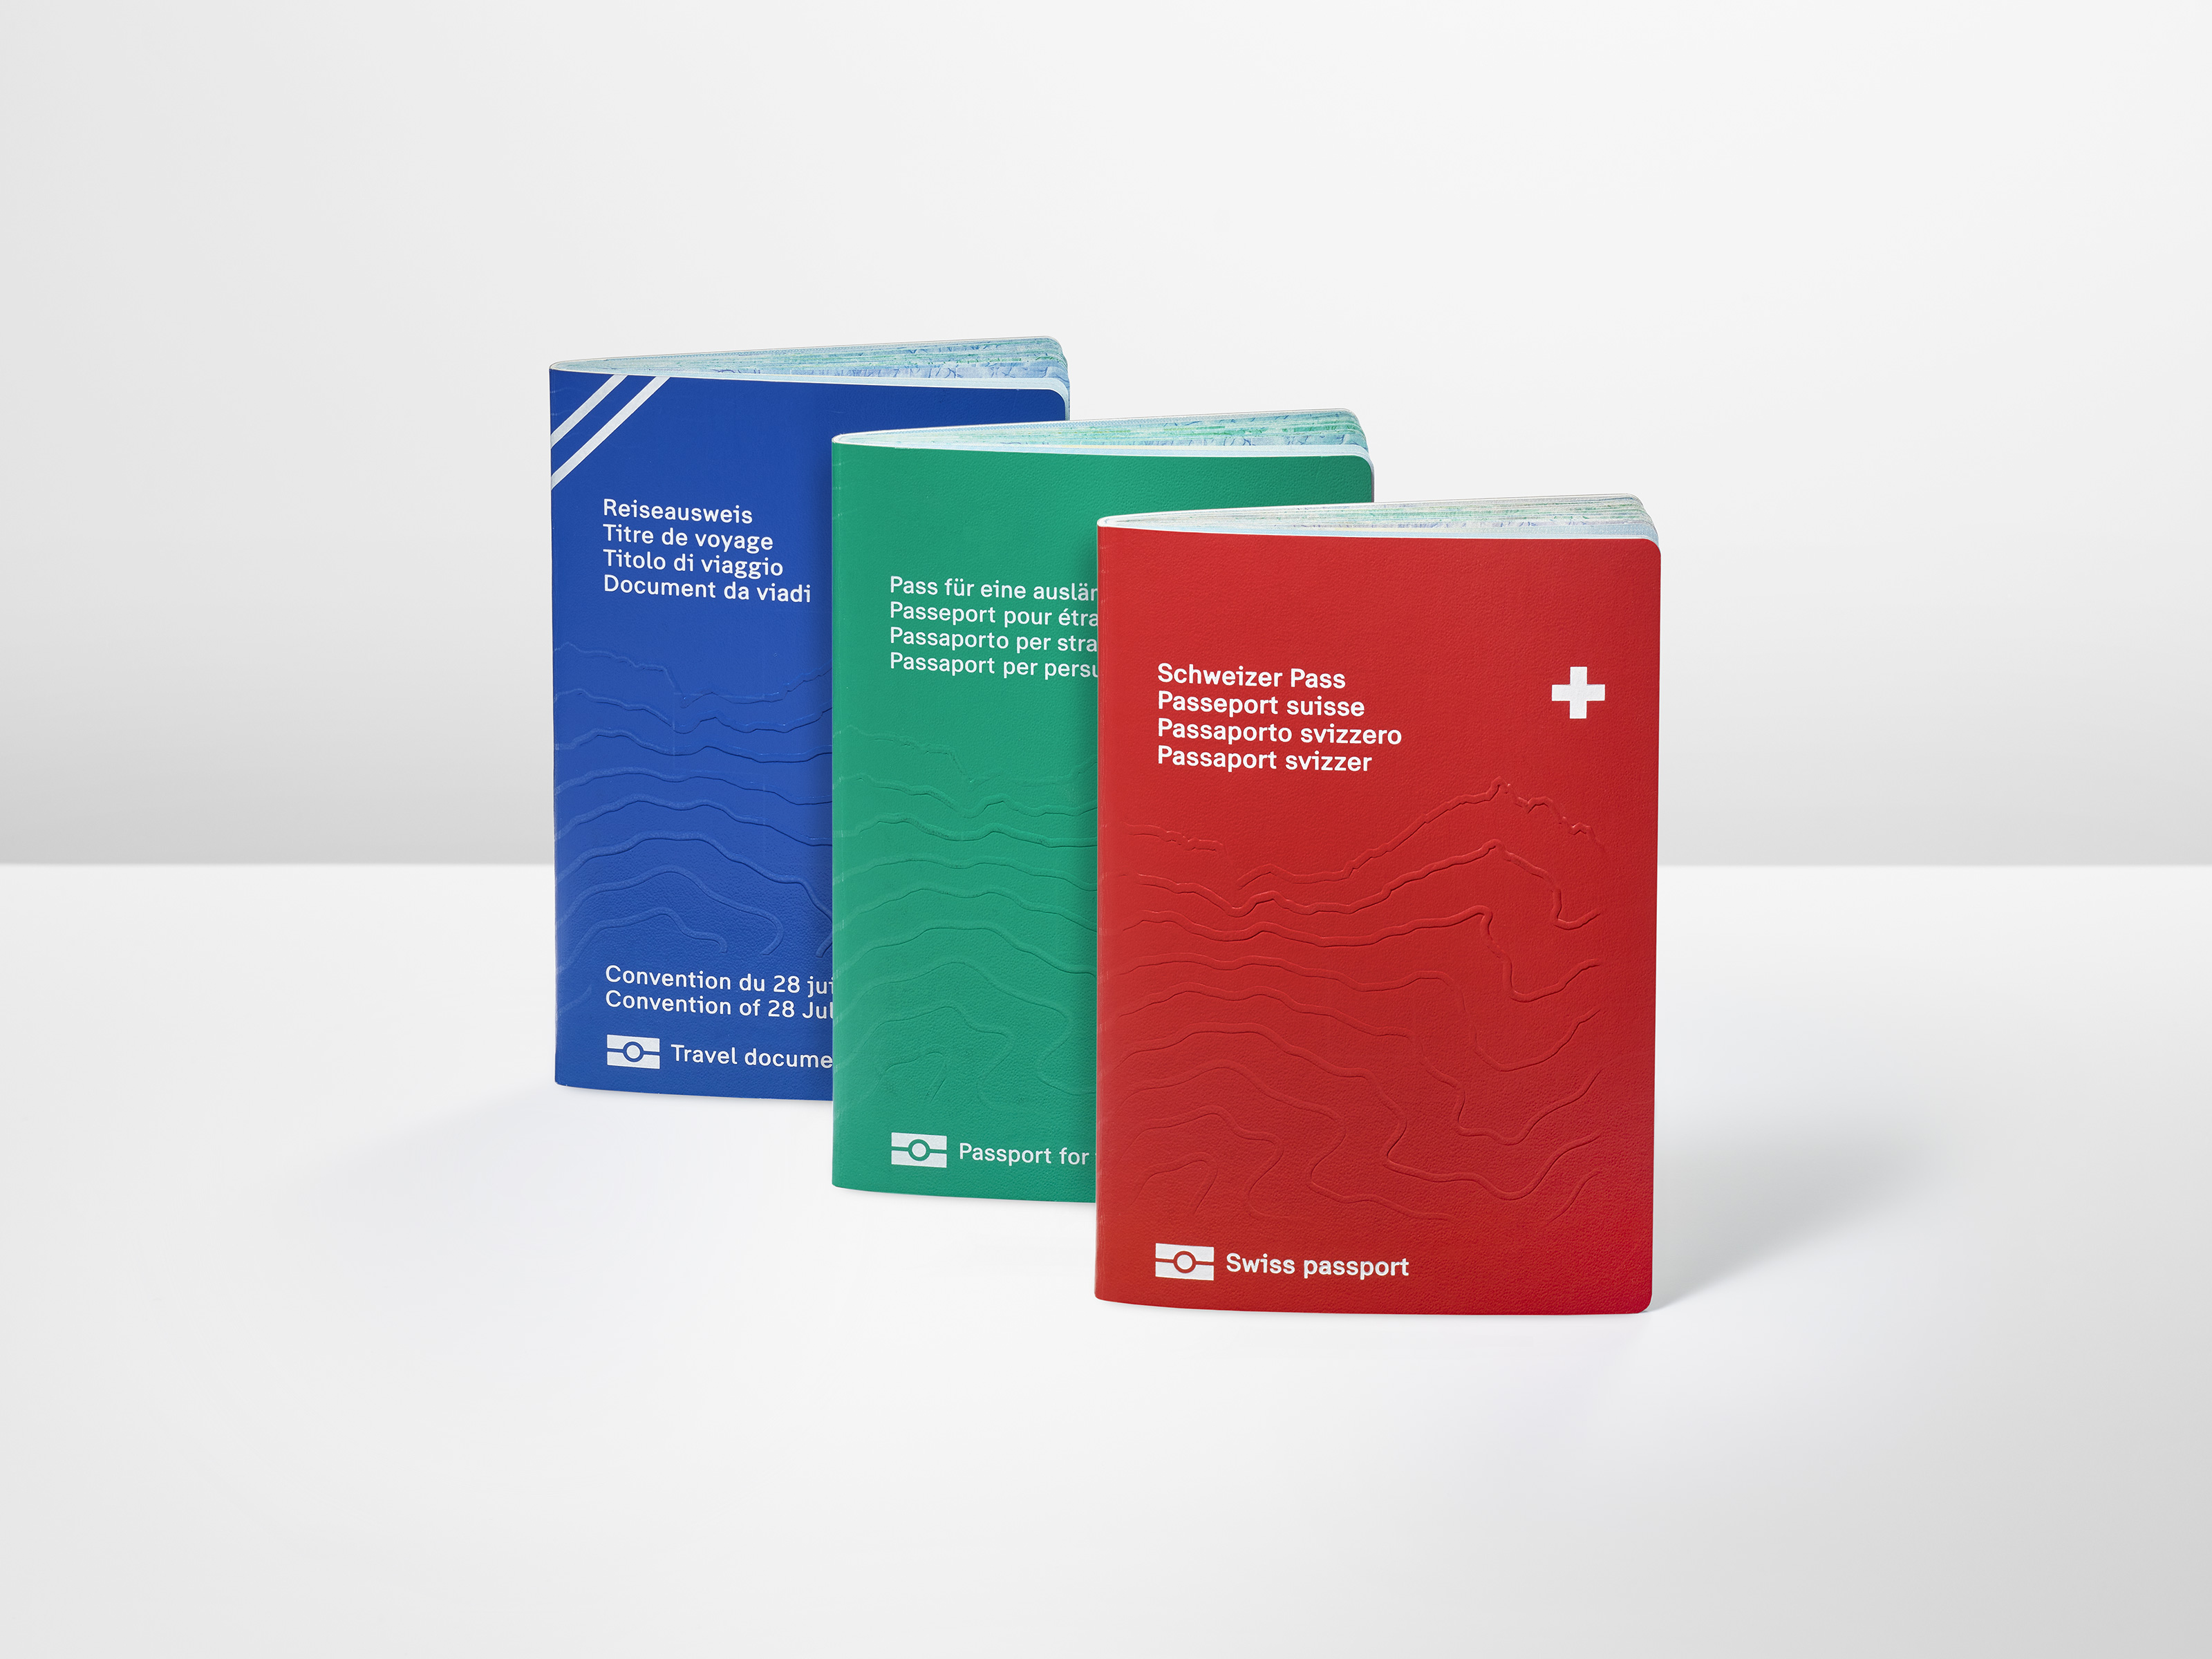 Federal Office of Police (fedpol) The New Swiss Passport Series The